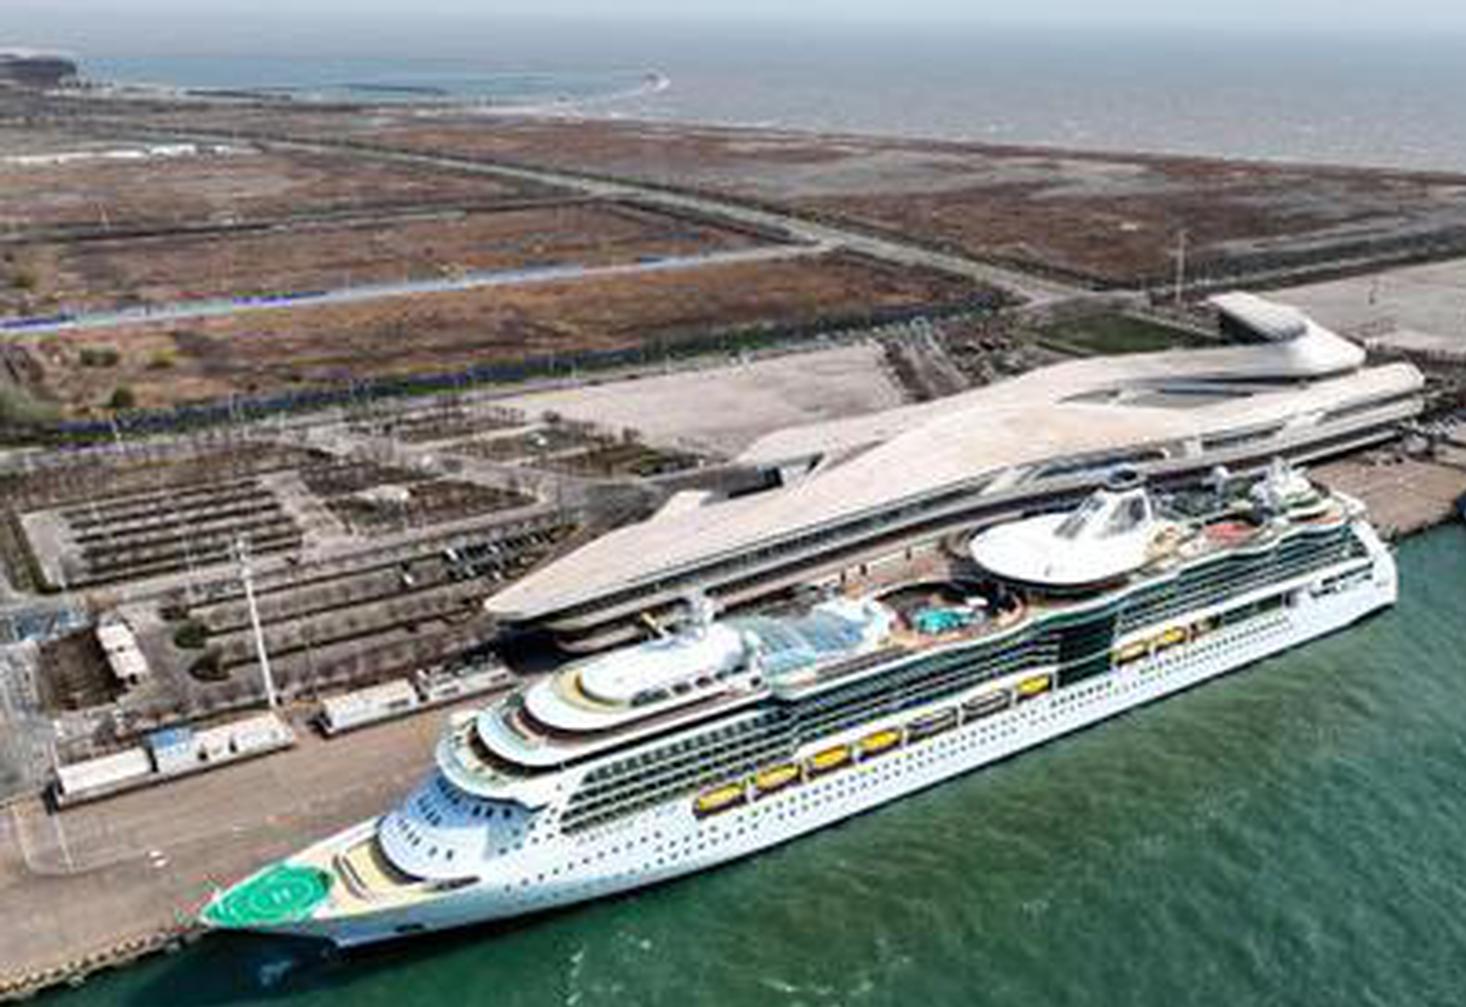 China waives visas for foreign cruise groups to coastal regions